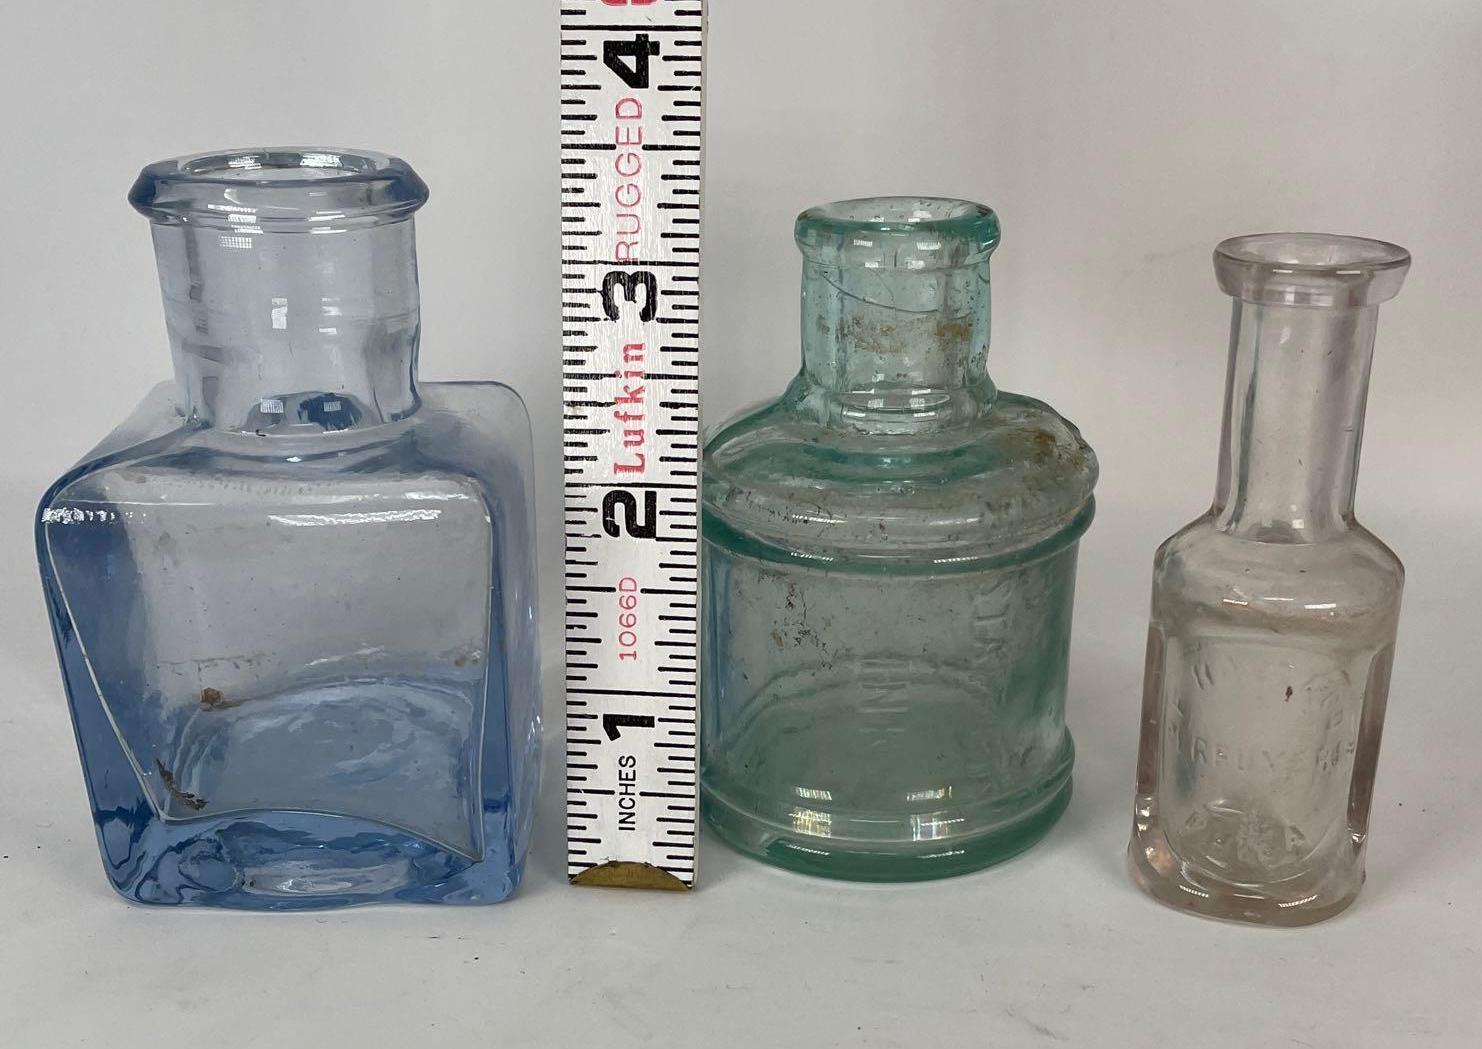 3 Small Glass Bottles- Green is Marked "Ink", Clear Marked "Perfume"